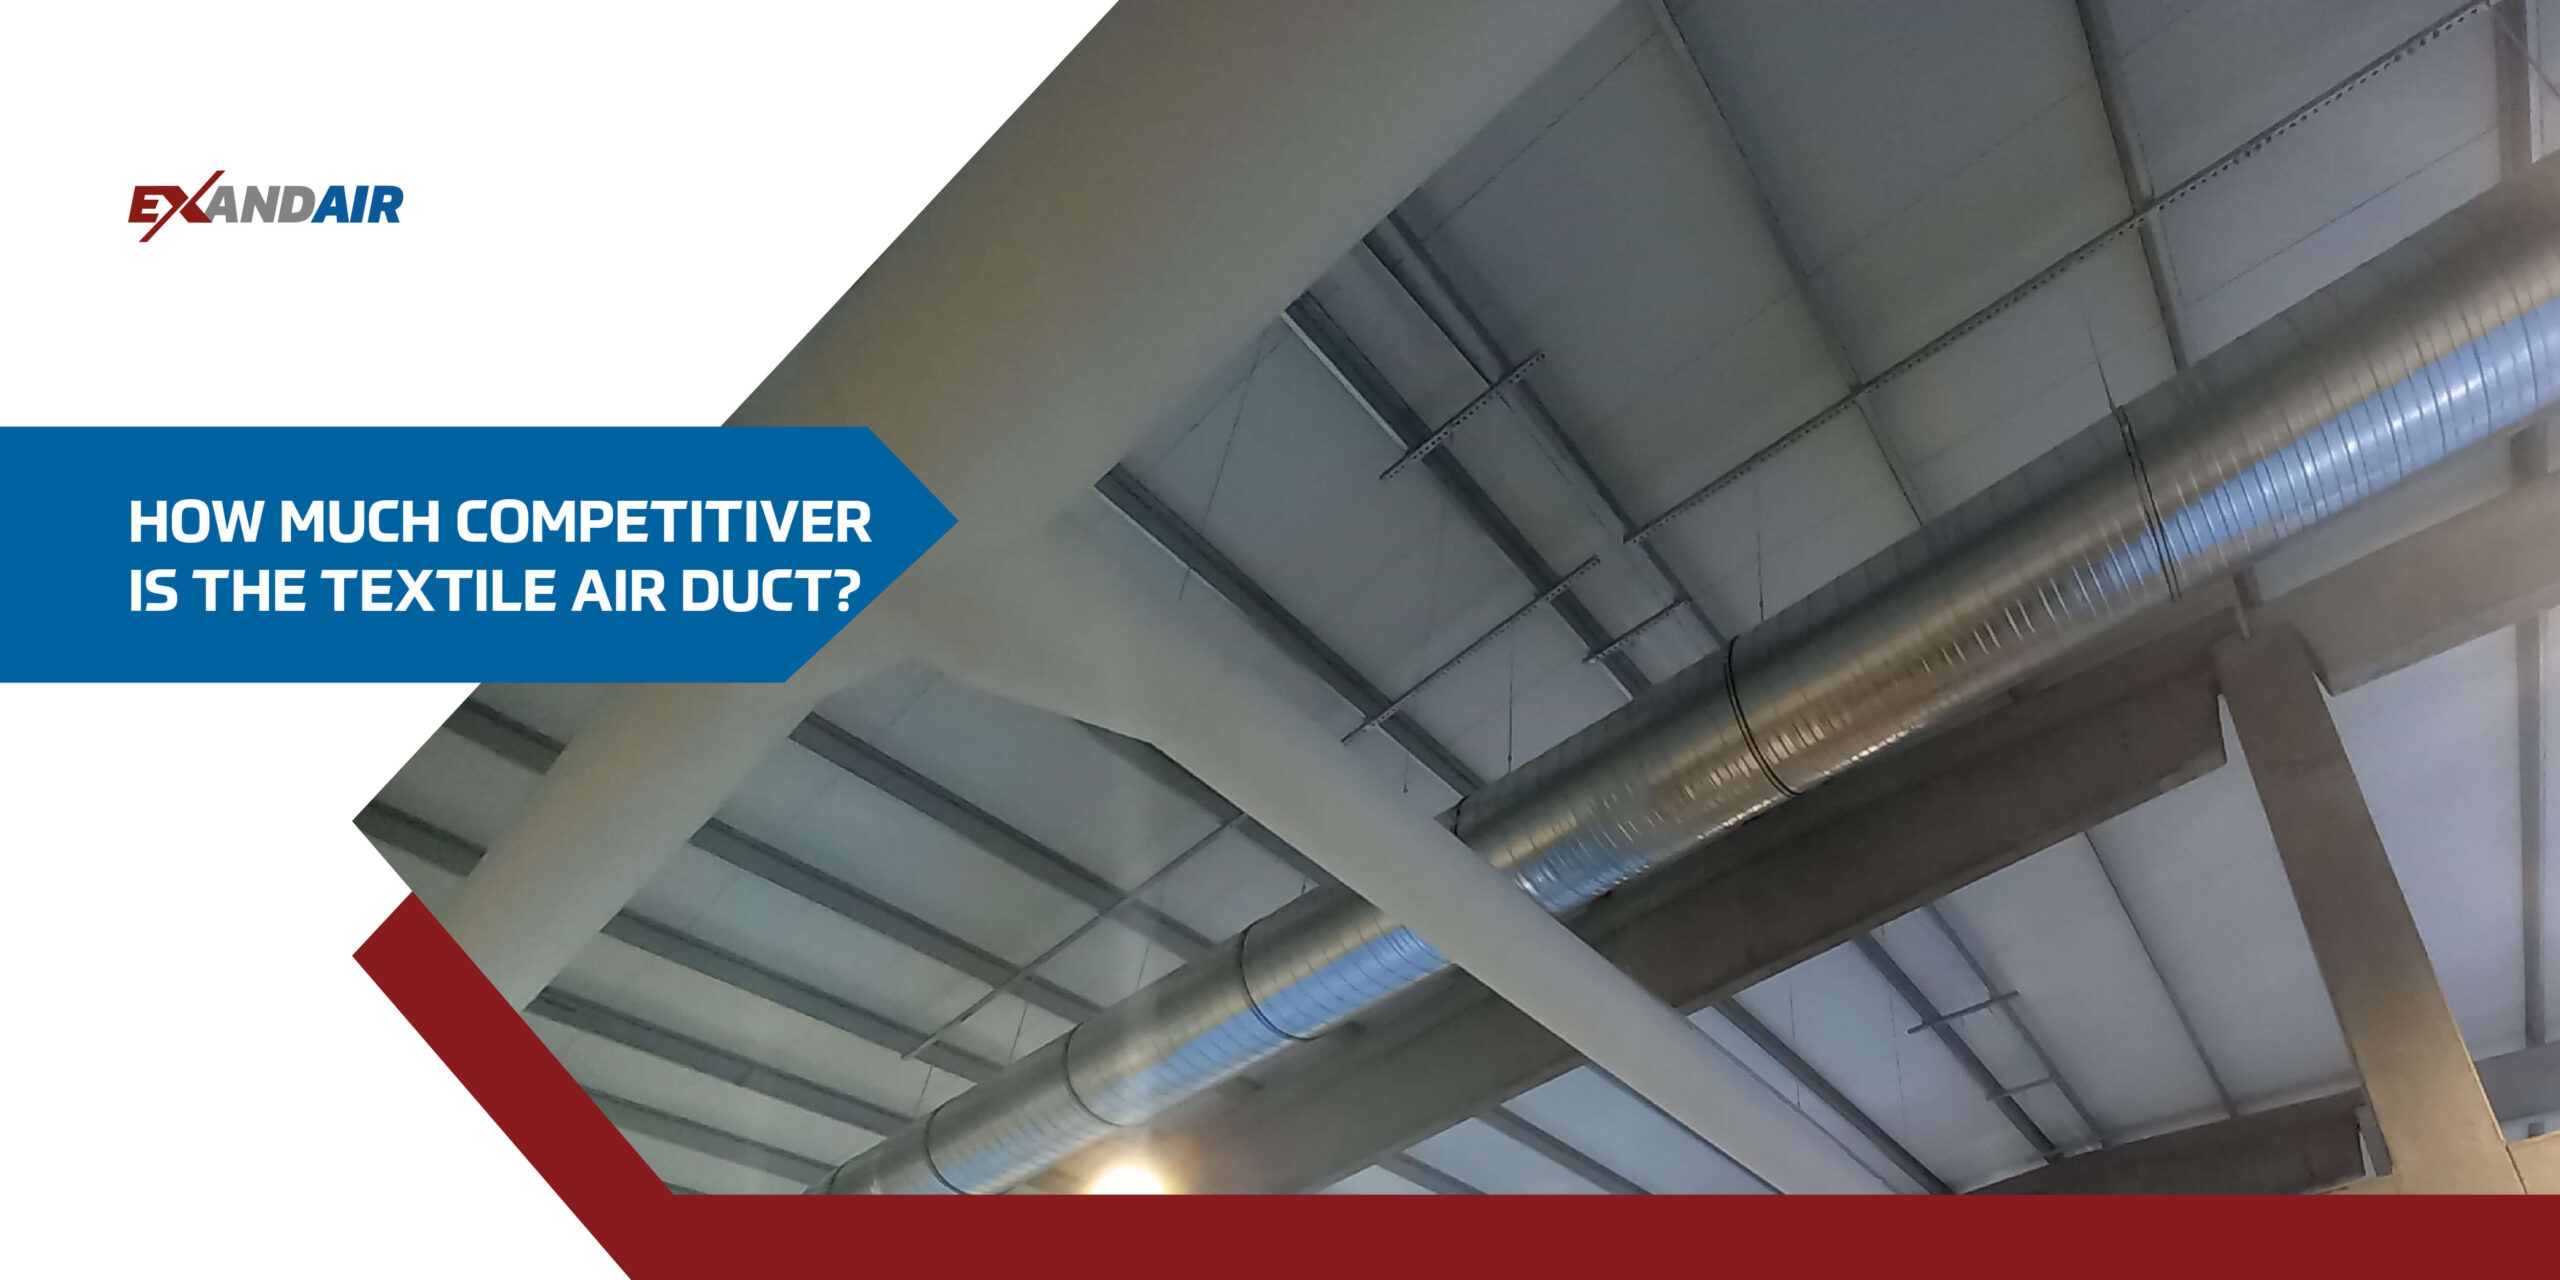 The price of textile ducting - Why and how much cheaper is textile ducting?